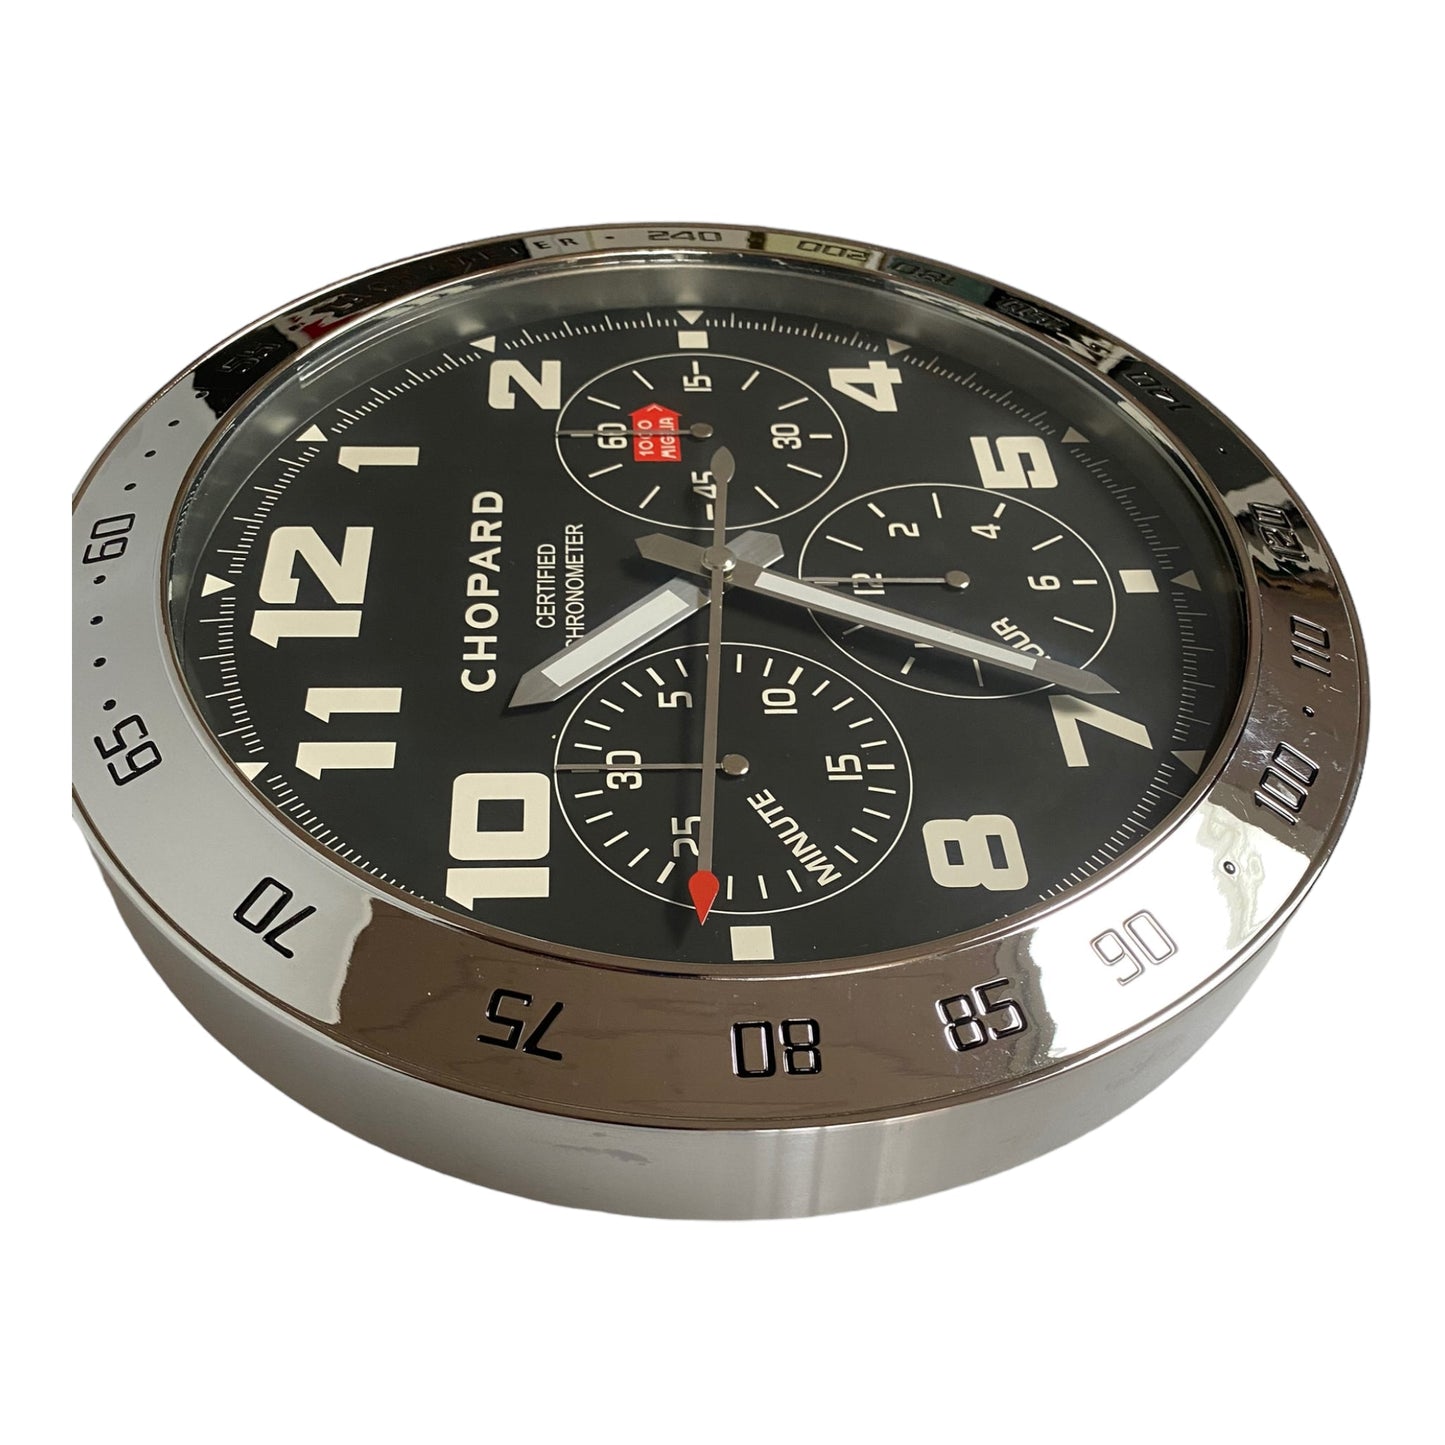 Chopard Official Retailer's Mille Miglia Chronograph Wall Clock